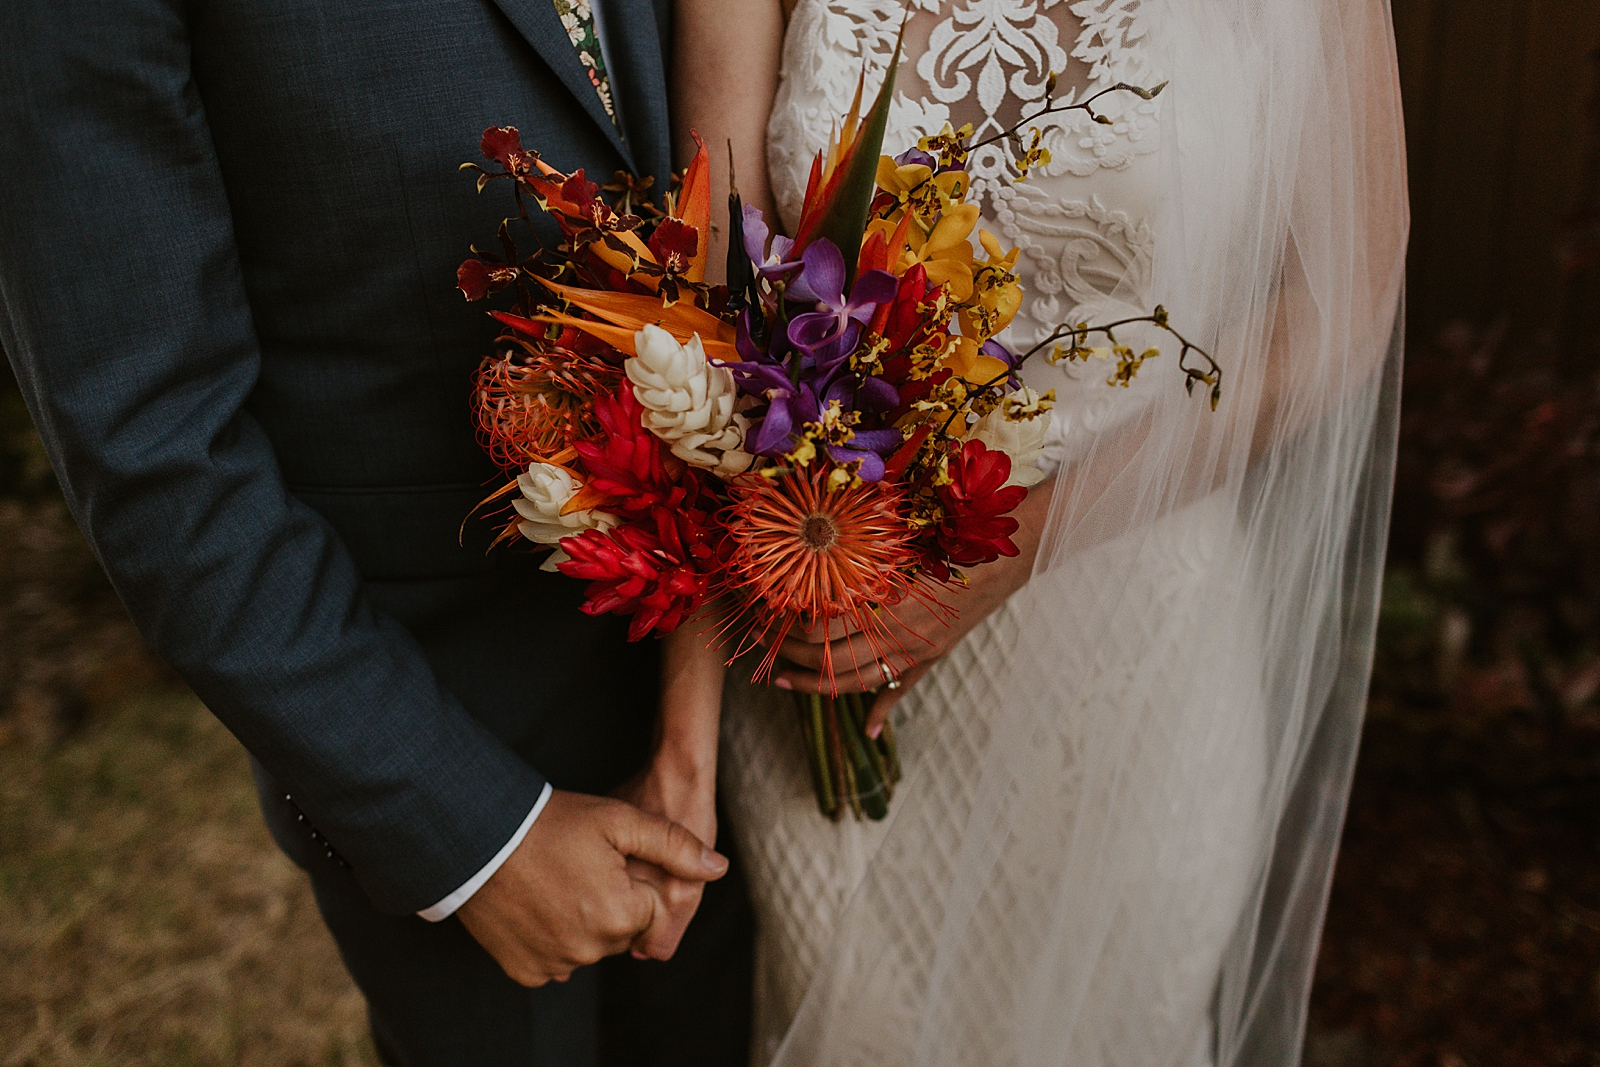 Bride and Groom holding hands and Bride holding colorful bouquet